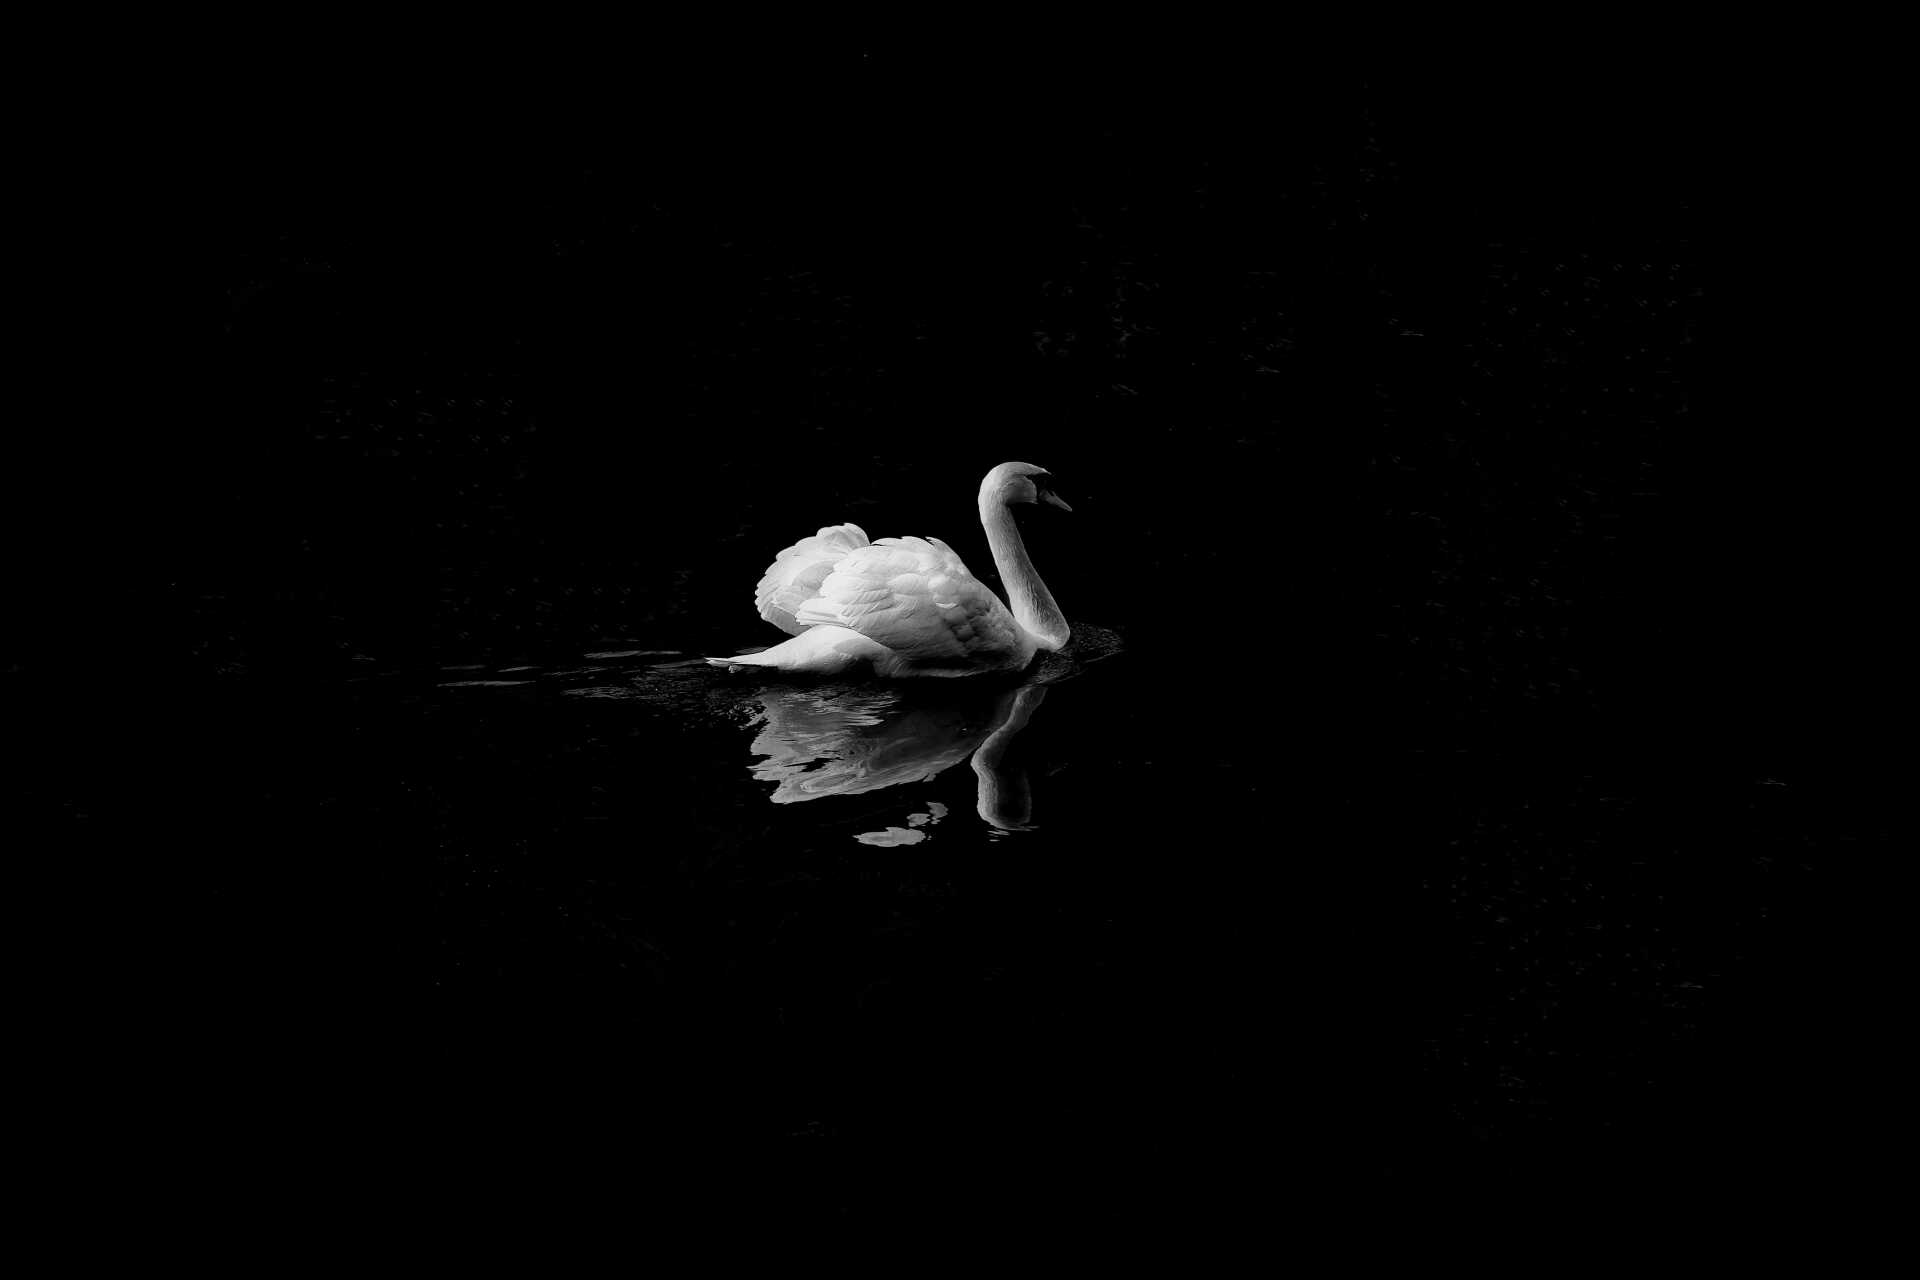 Stark photo of a white swan against a black background